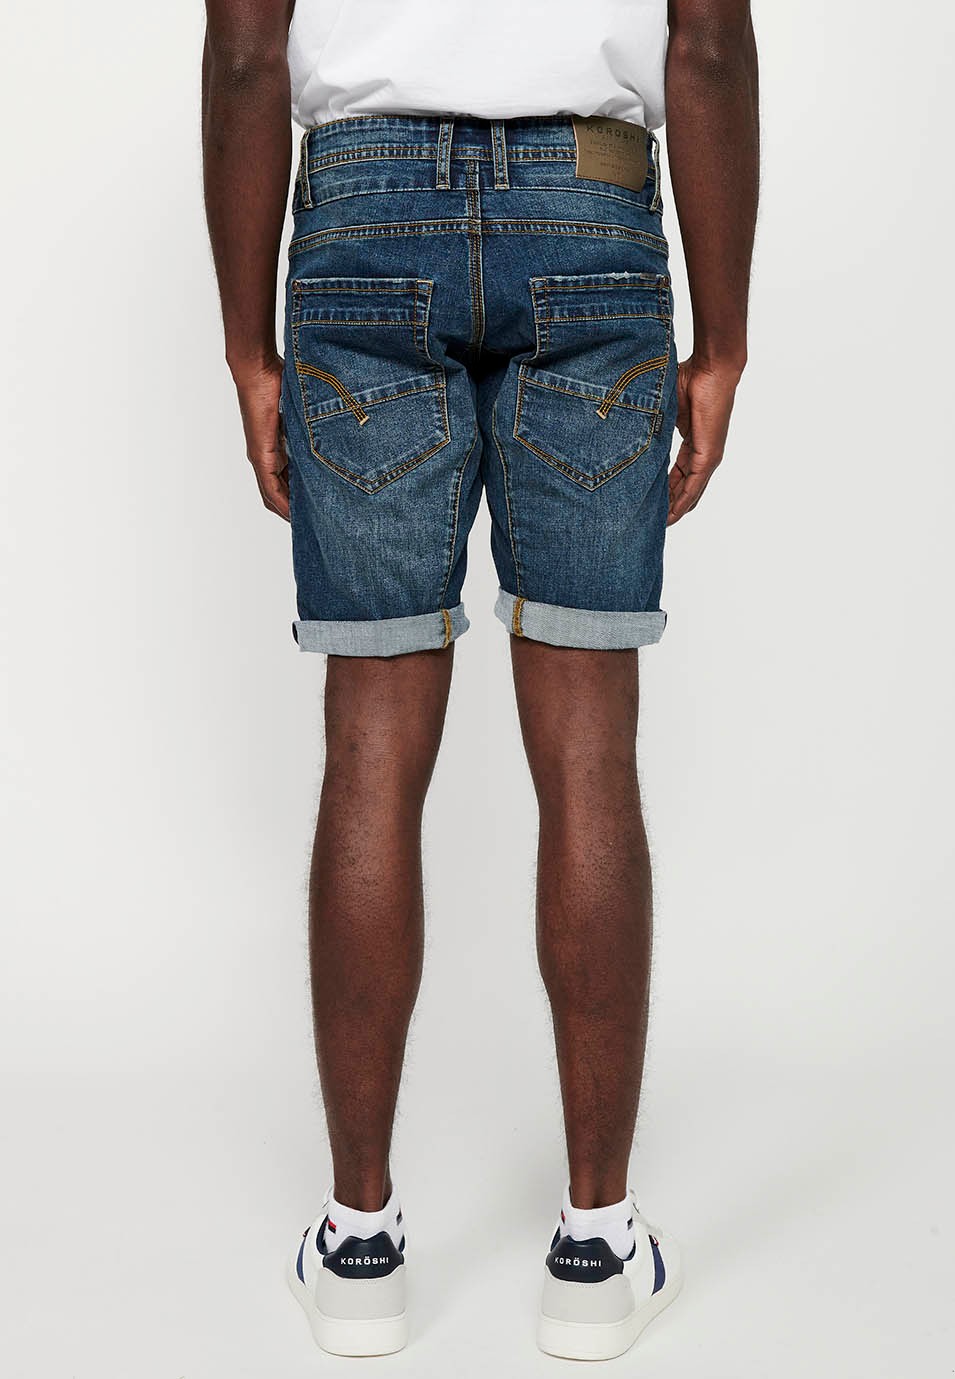 Denim Bermuda Shorts with Turn-Up Finish and Front Zipper and Button Closure with Five Pockets, One Pocket Pocket with Blue Front Details for Men 1